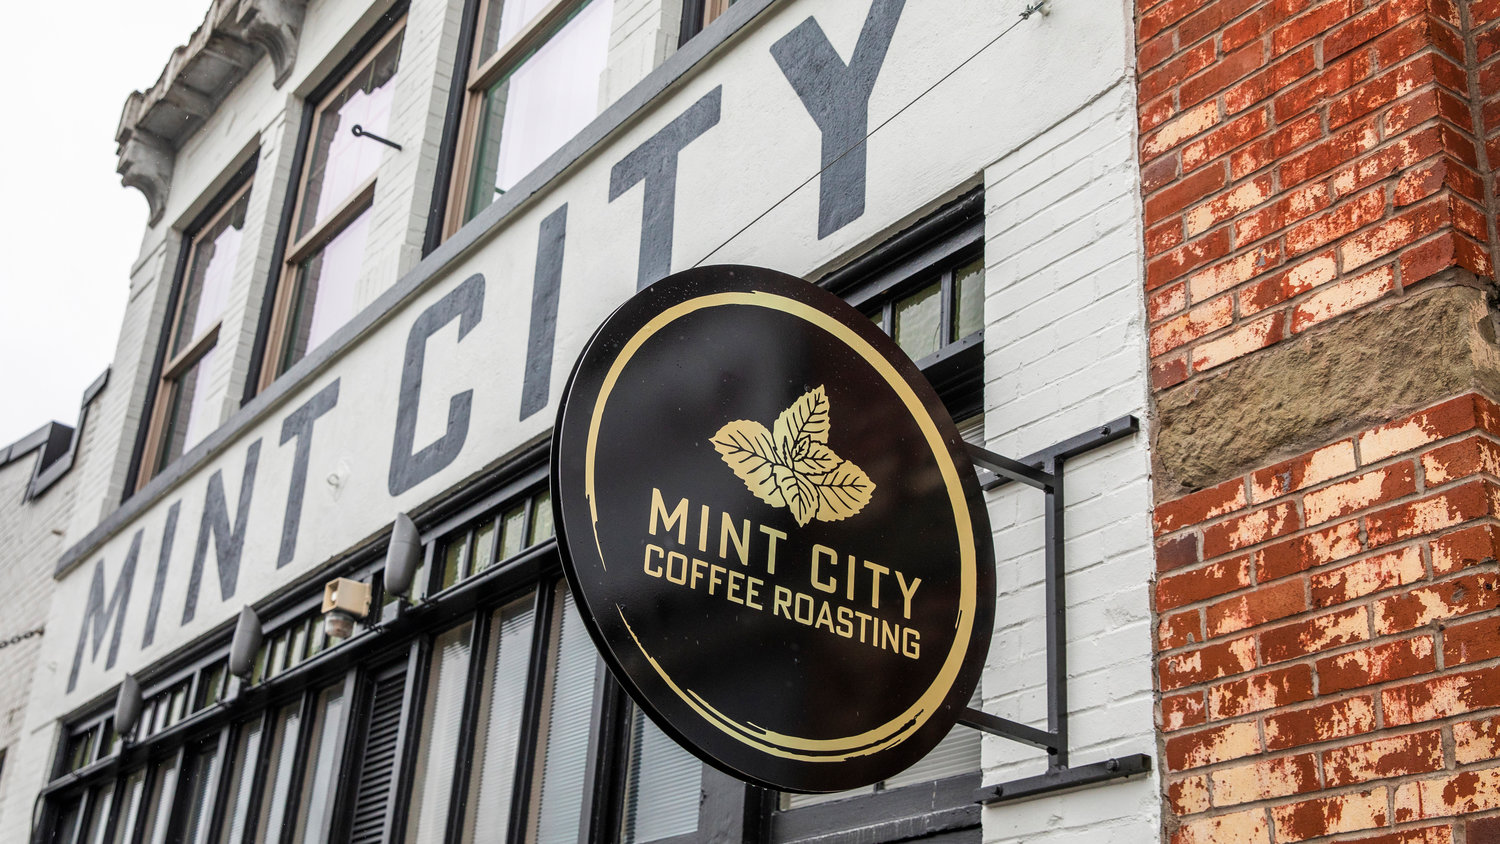 Mint City Coffee Roasting is located at 539 N. Market Blvd. Suite C, in Chehalis.